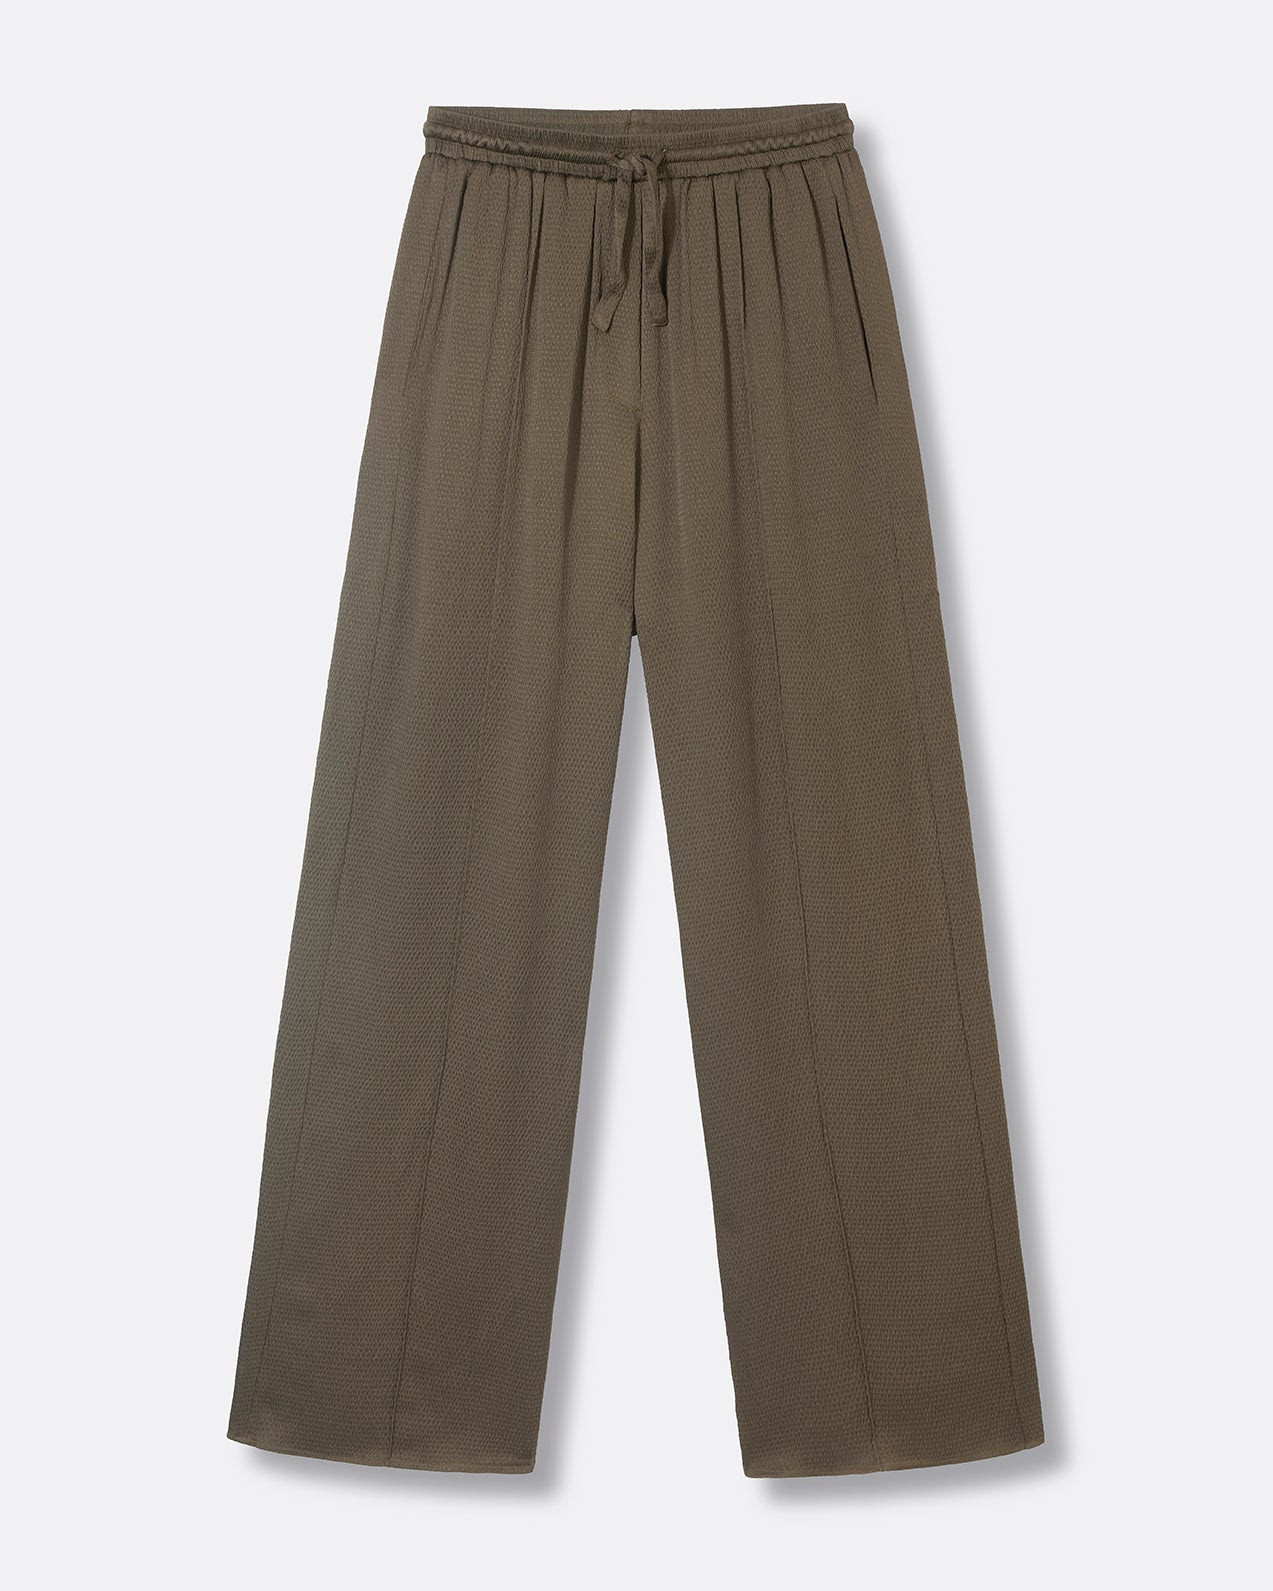 Cleo satin trousers - Olive